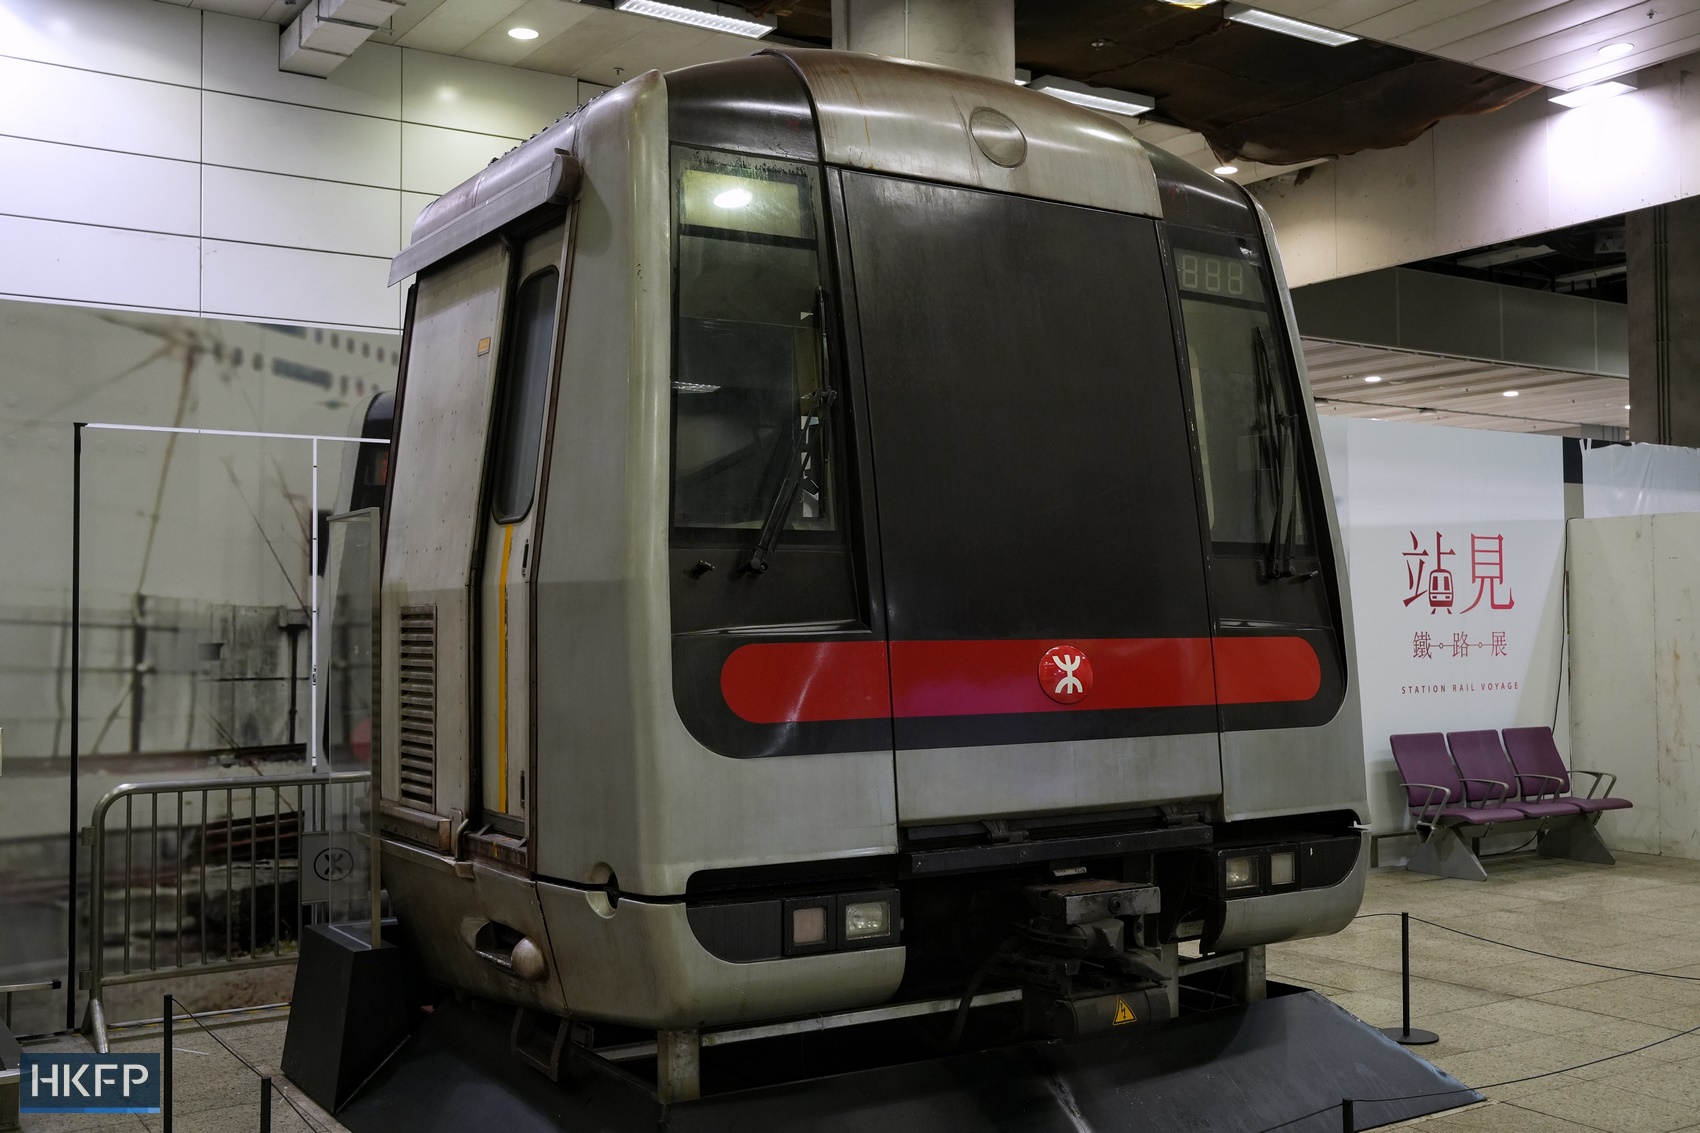 An MTR modernisation train head, popularly known as “M-Train,” is showcased at the “Station Rail Voyage” exhibition, presented by the MTR Corporation.